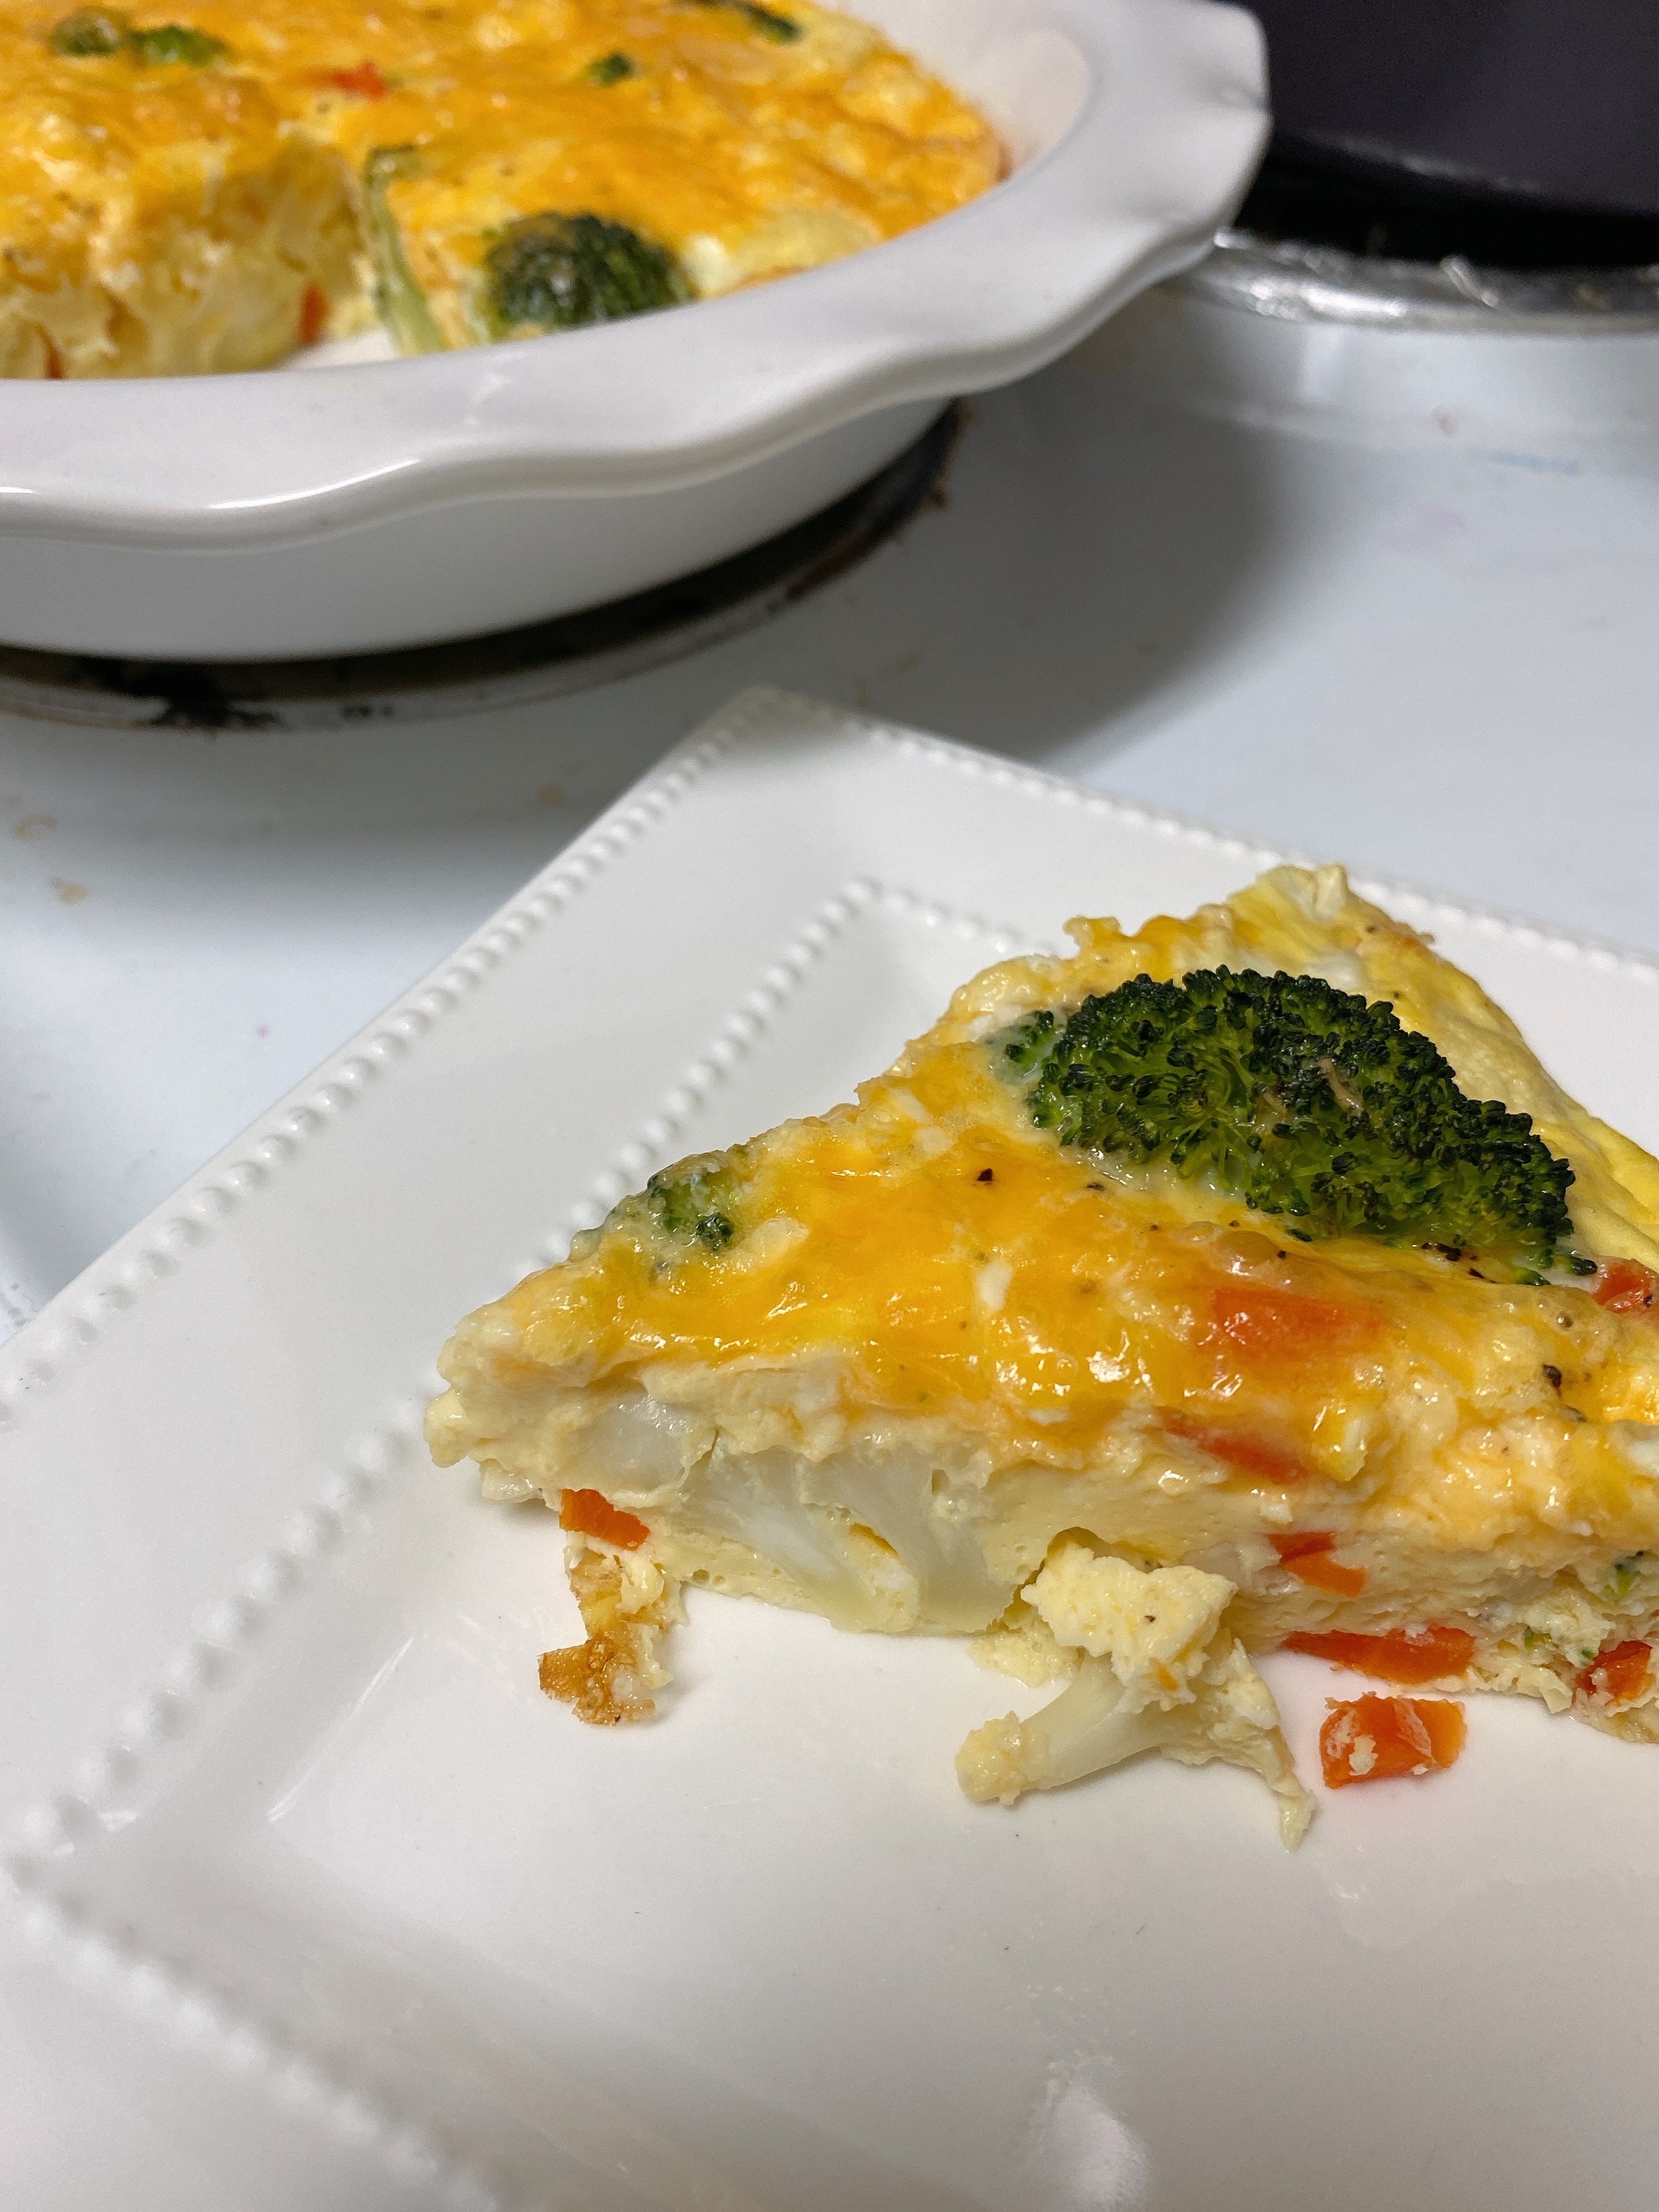 Vegetable Frittata with Cheddar